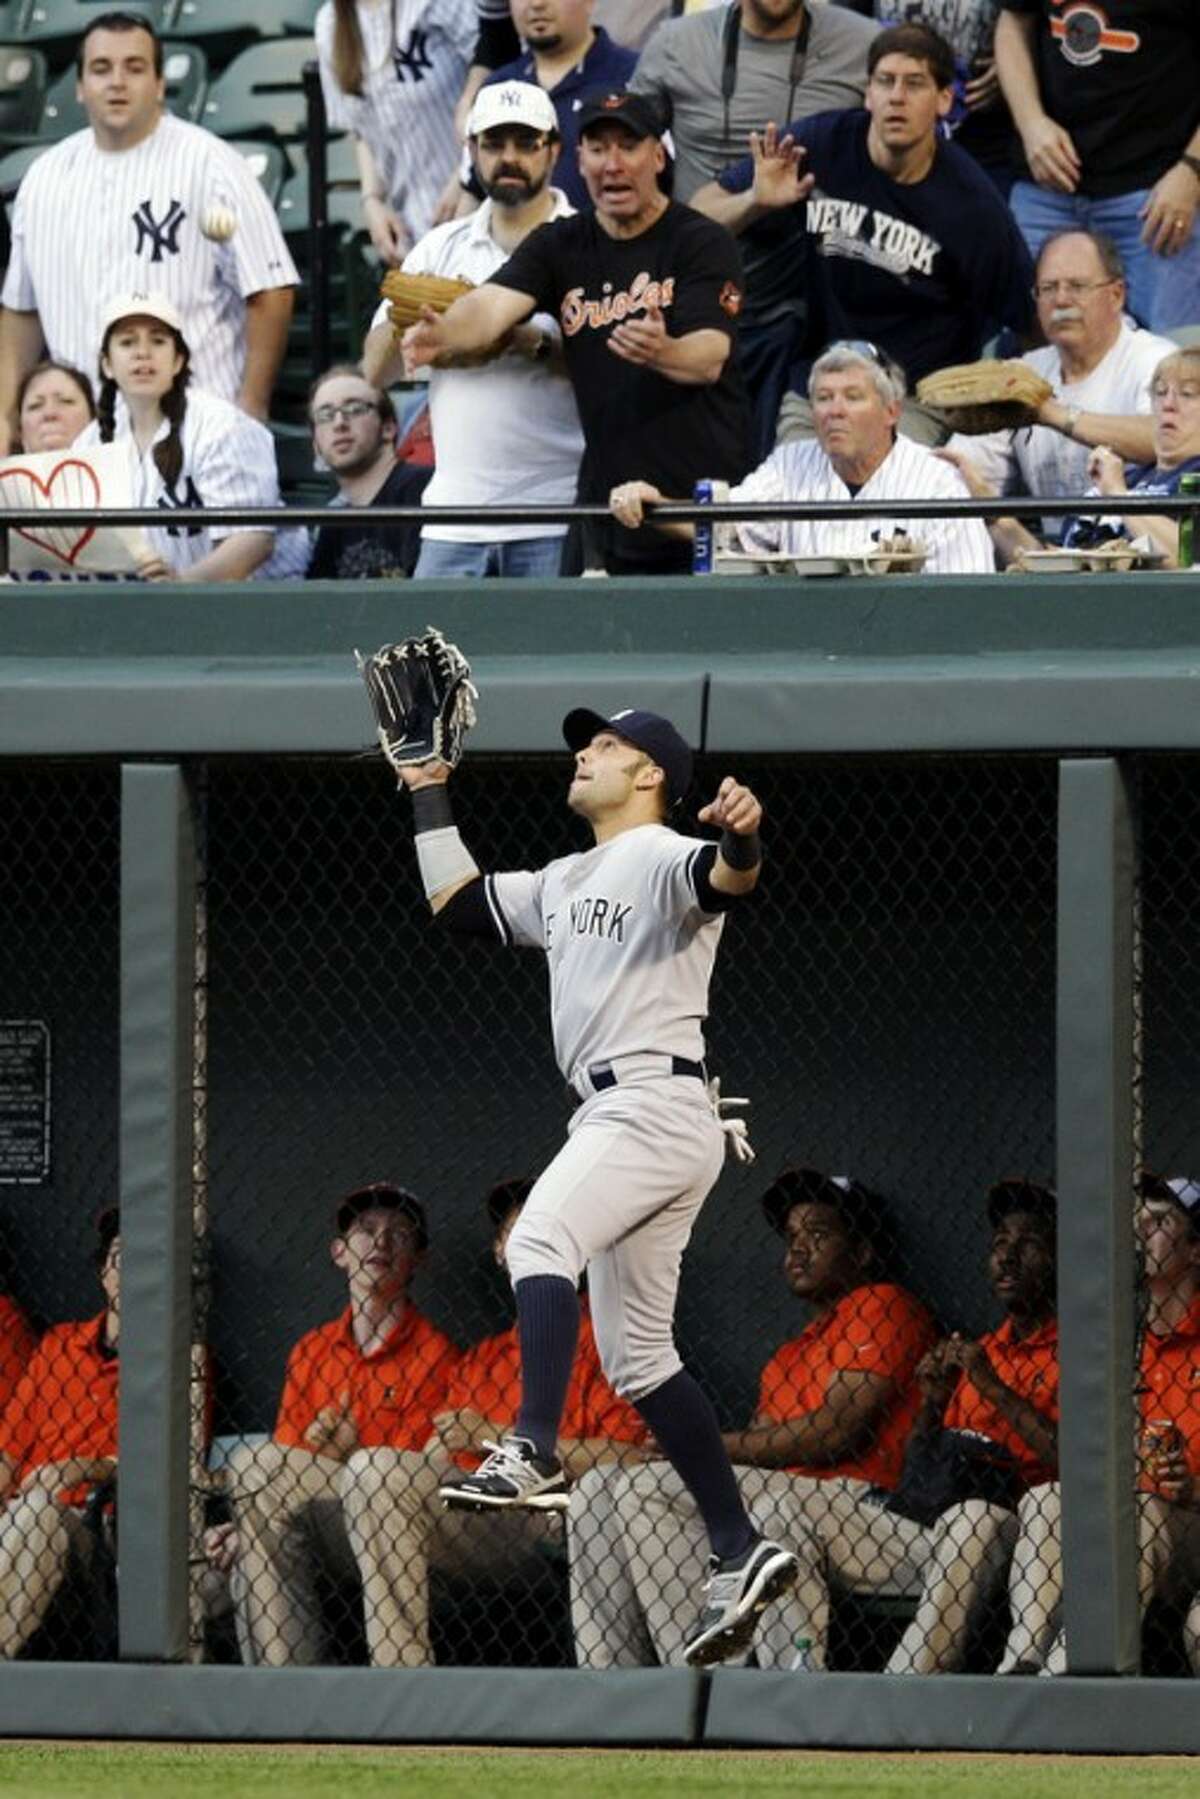 New York Yankees right fielder Nick Swisher leaps to catch a fly ball that was hit by Baltimore Orioles' J.J. Hardy in the first inning of a baseball game in Baltimore, Tuesday, May 15, 2012. (AP Photo/Patrick Semansky)